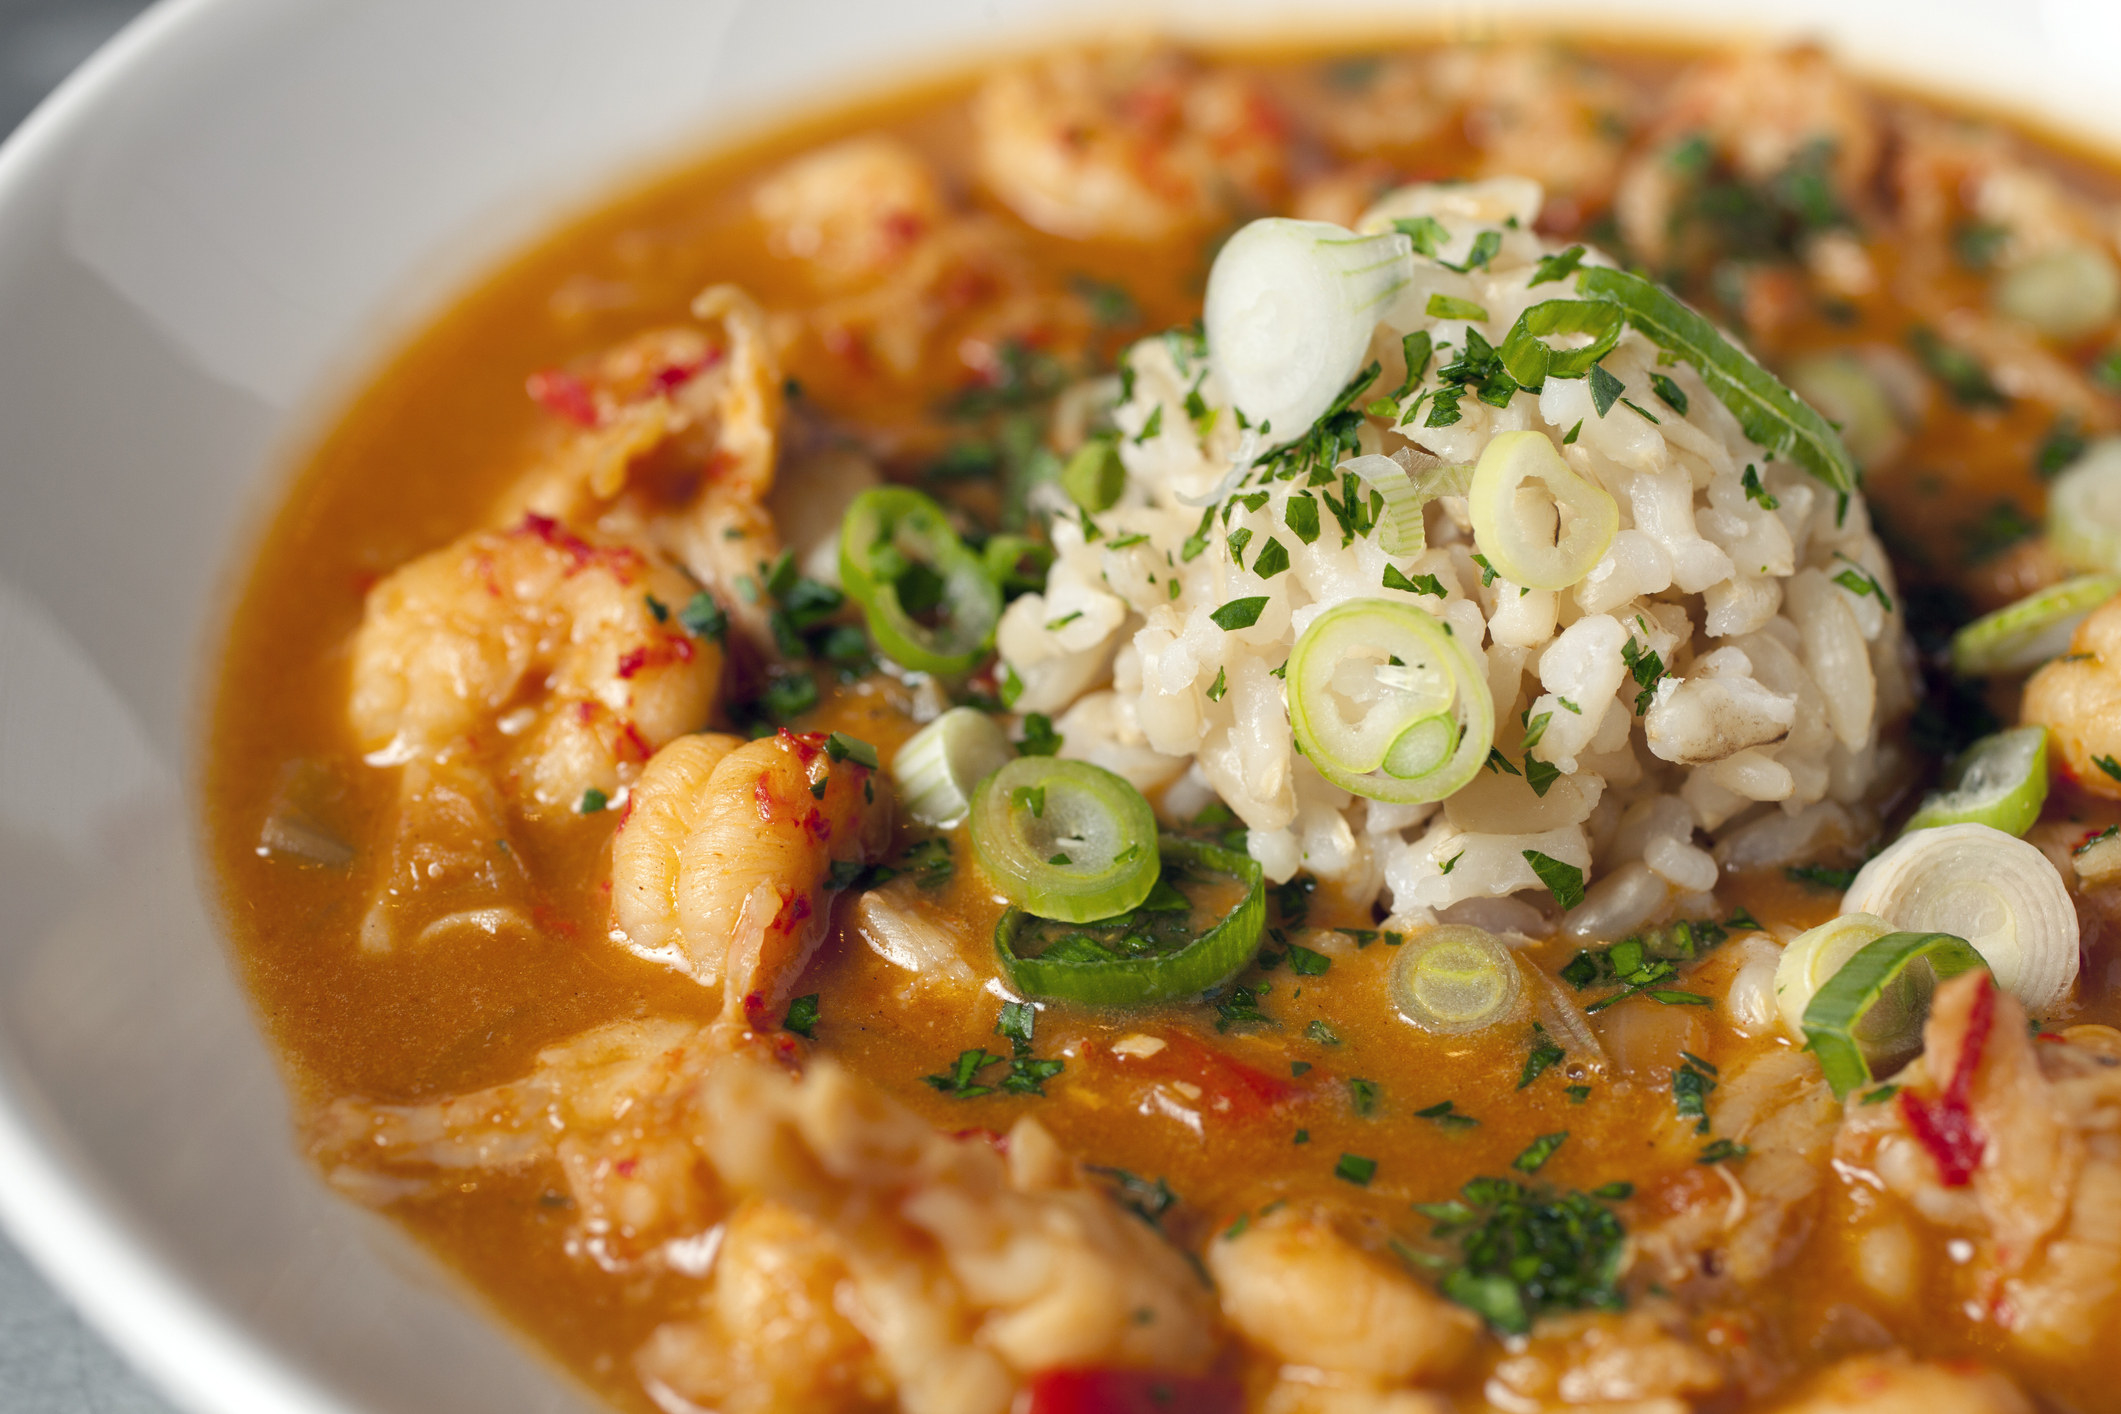 Étouffée with green onions